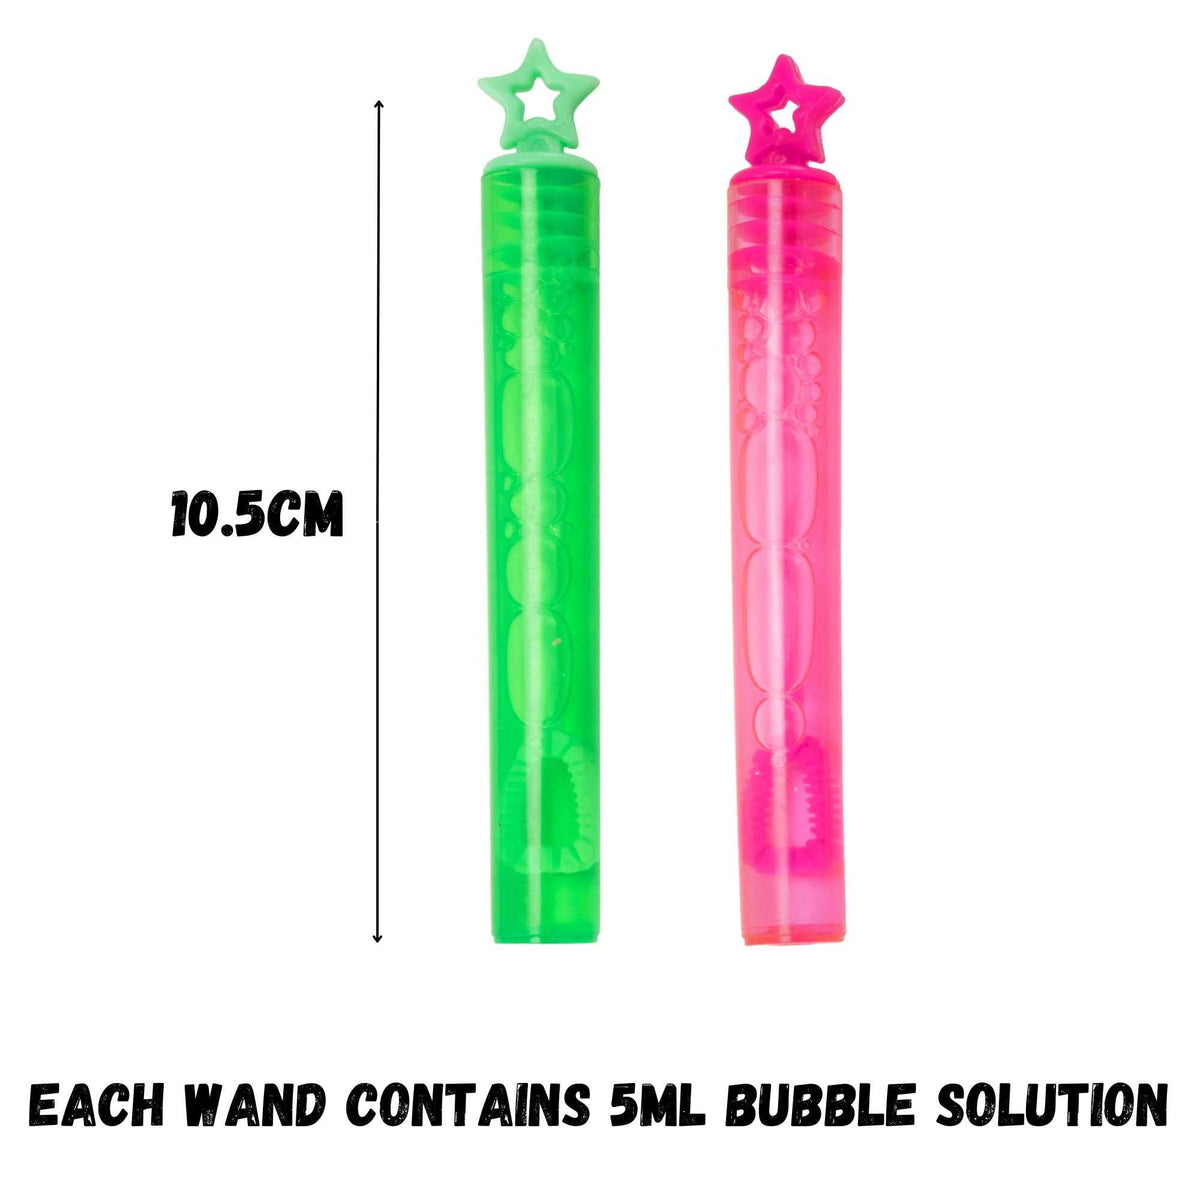 Bubblz 48 Pack of Bubble Wands - Bubble Solution Included